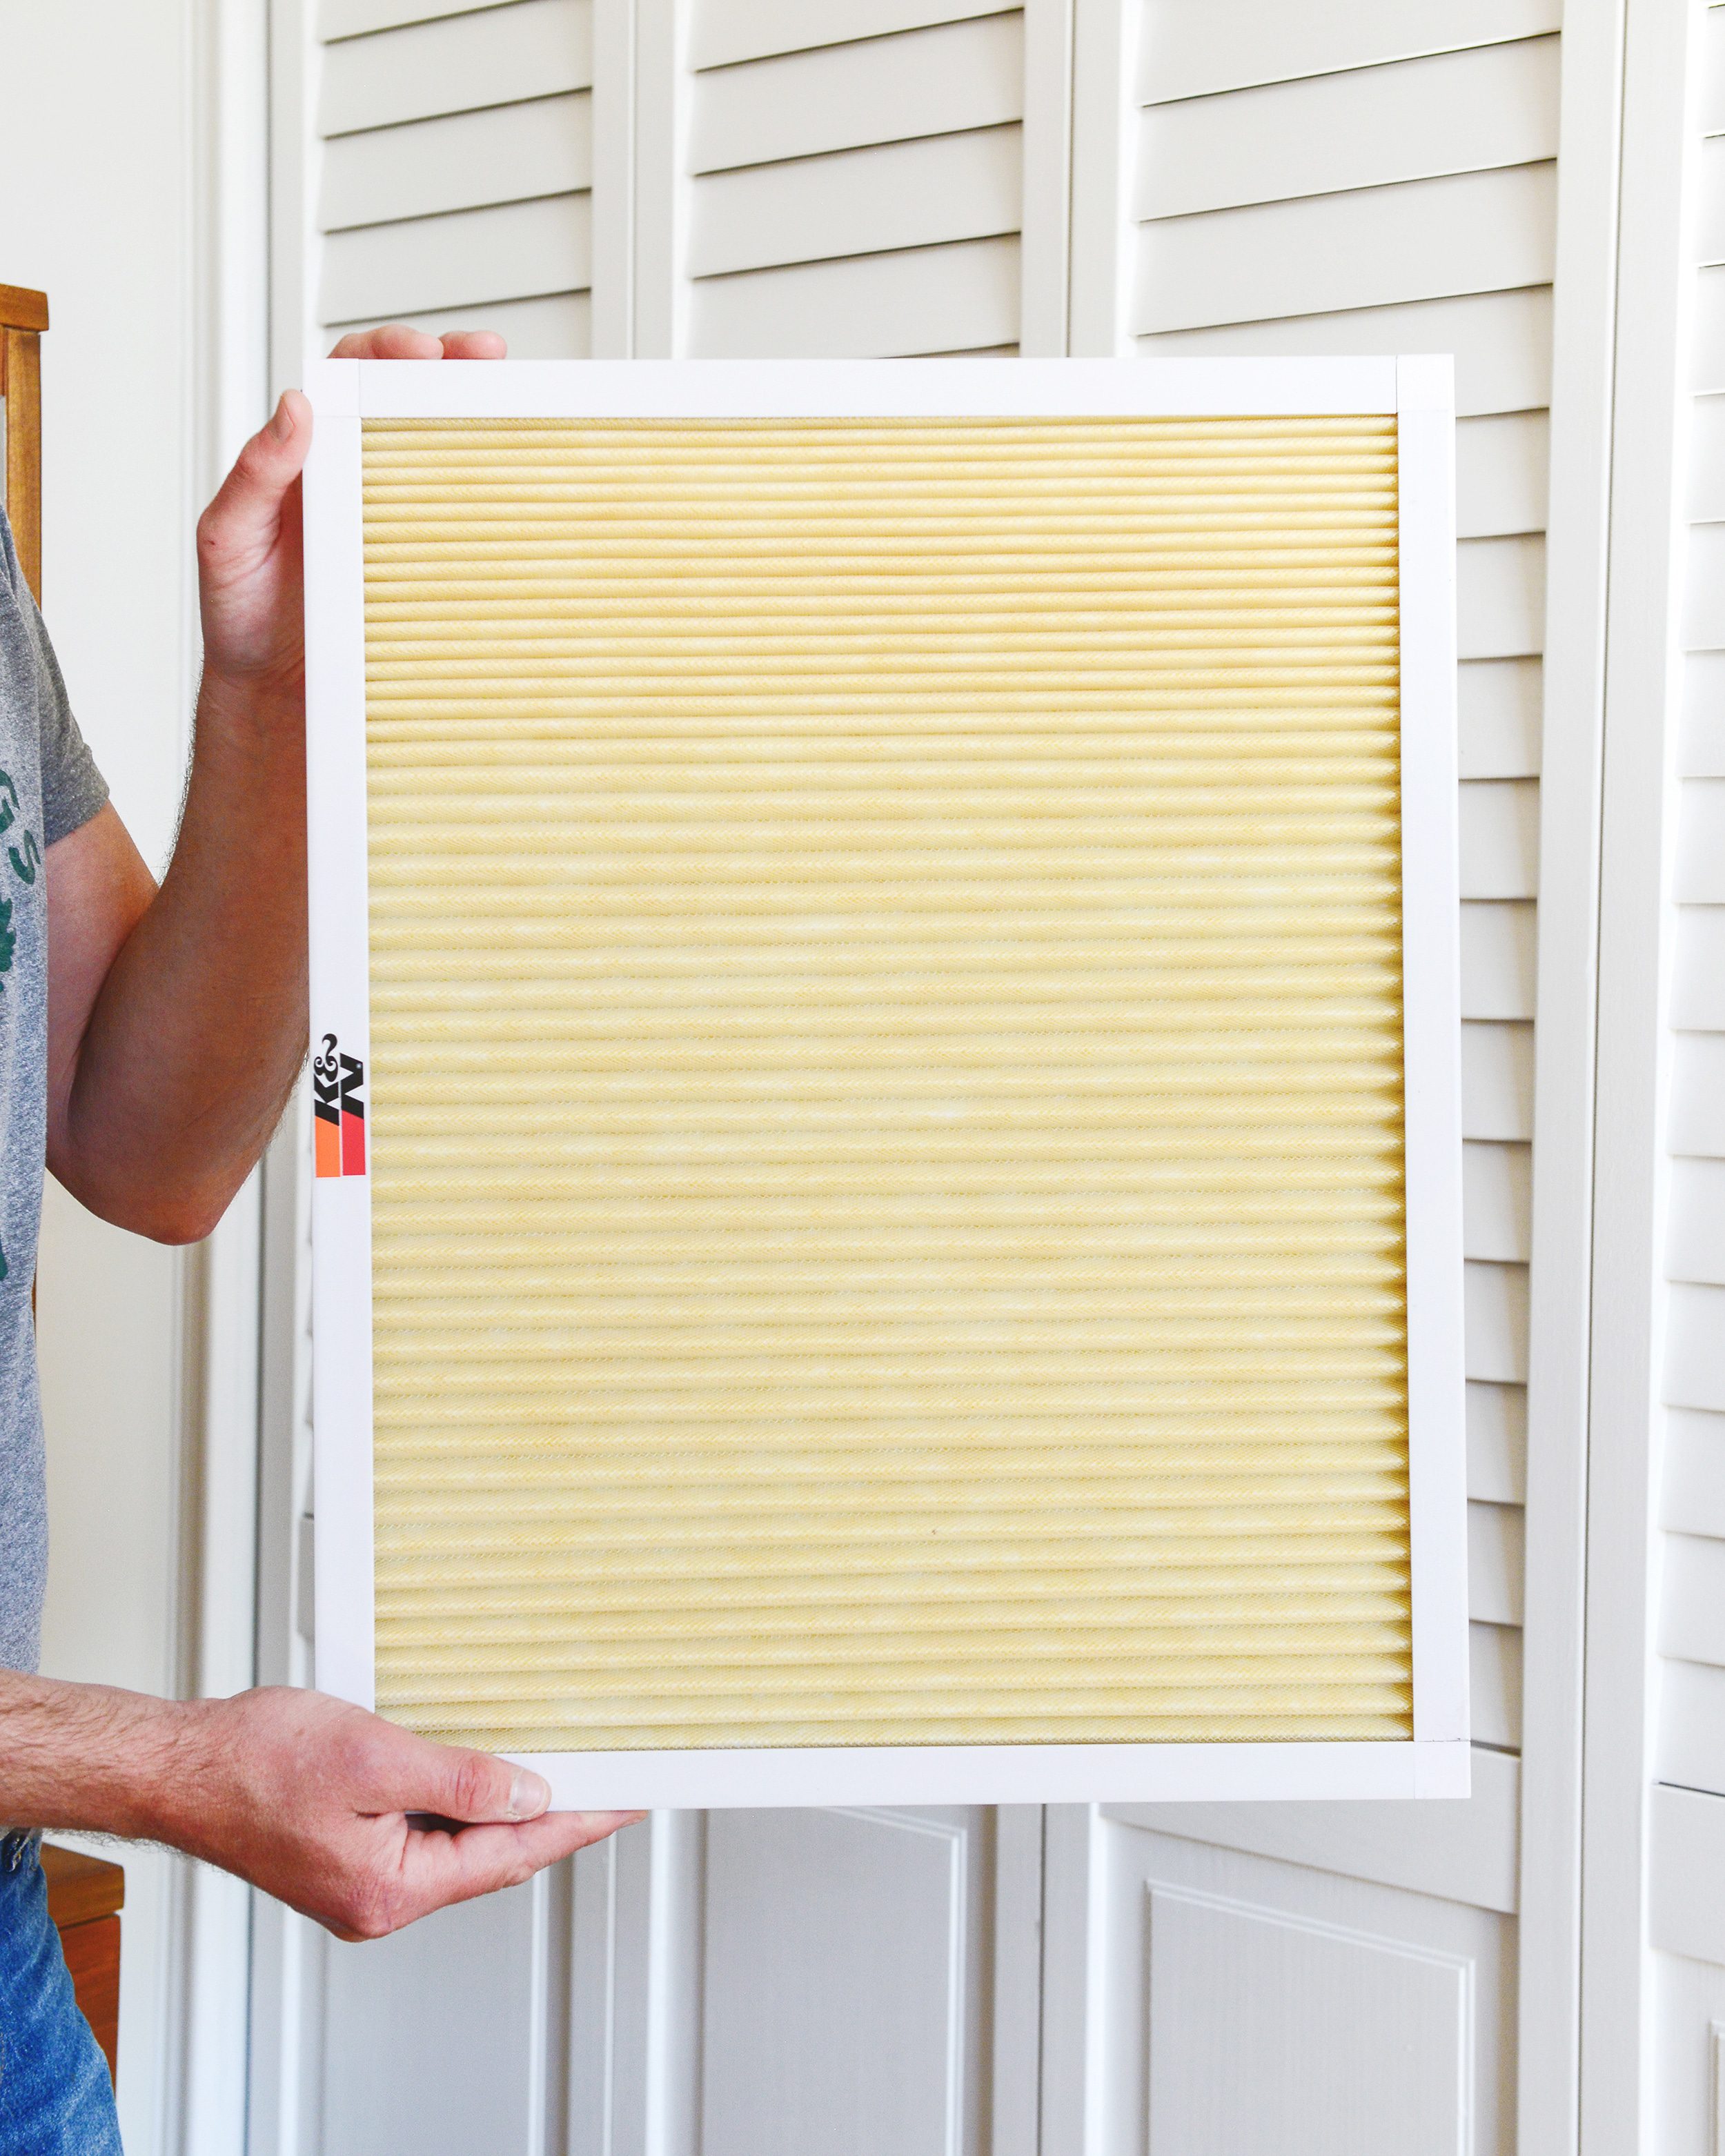 Washable and reusable HVAC filters for a healthier home // via Yellow Brick Home